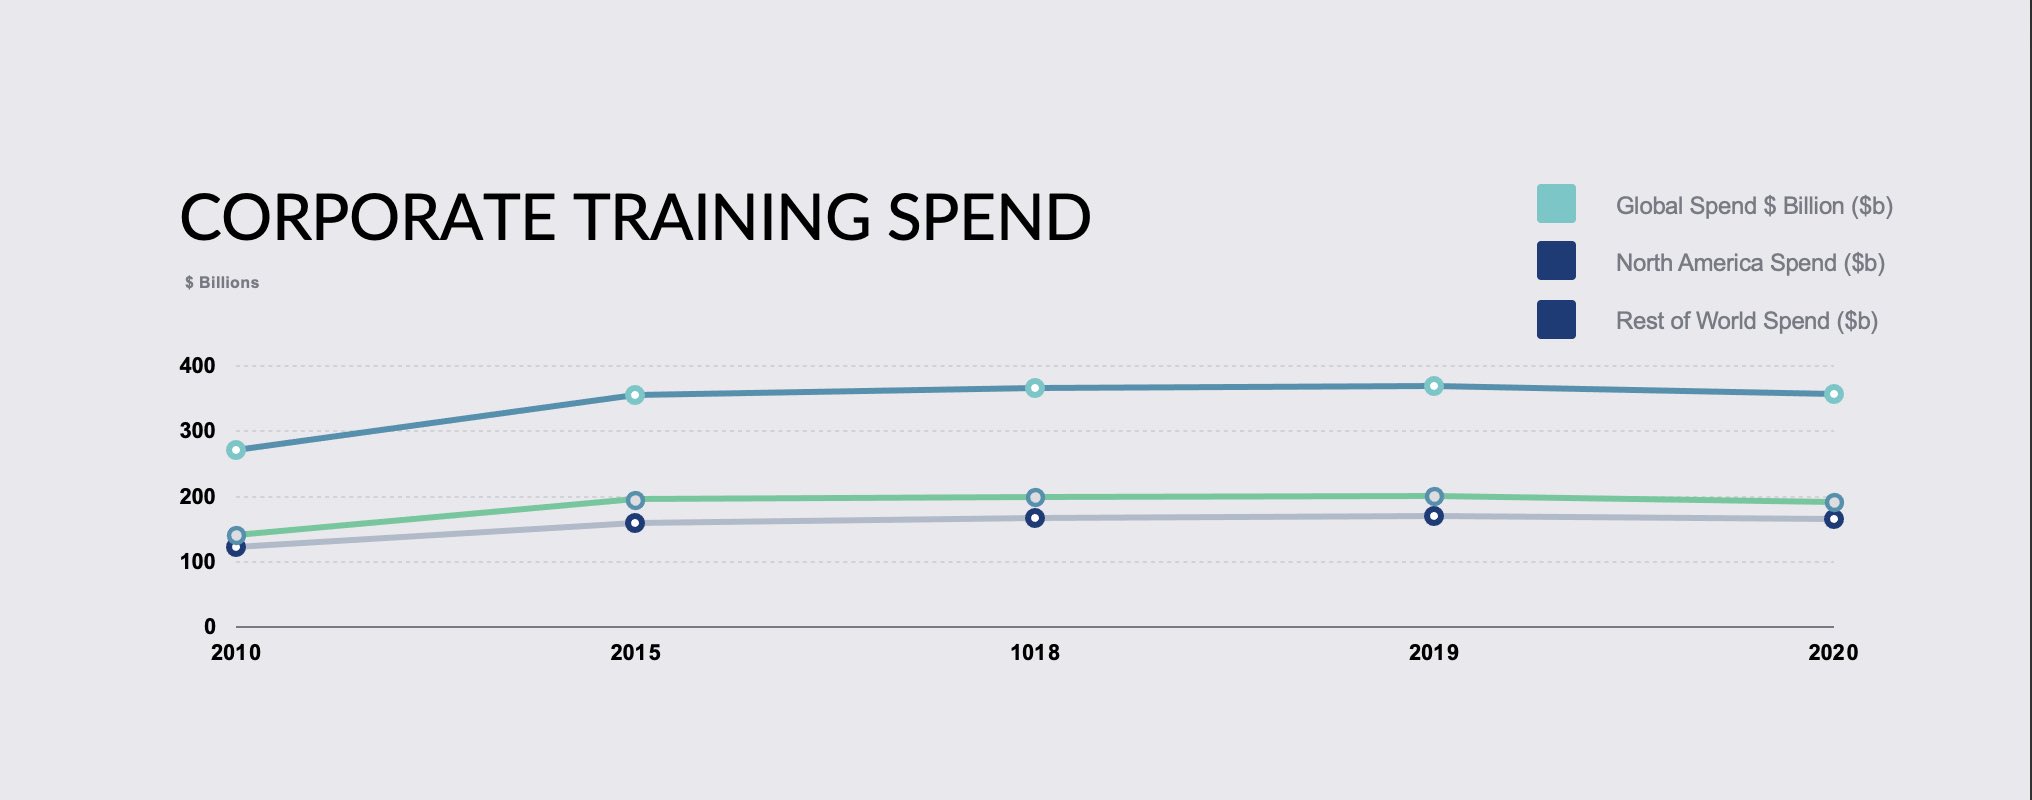 Corporate Global Training Spend